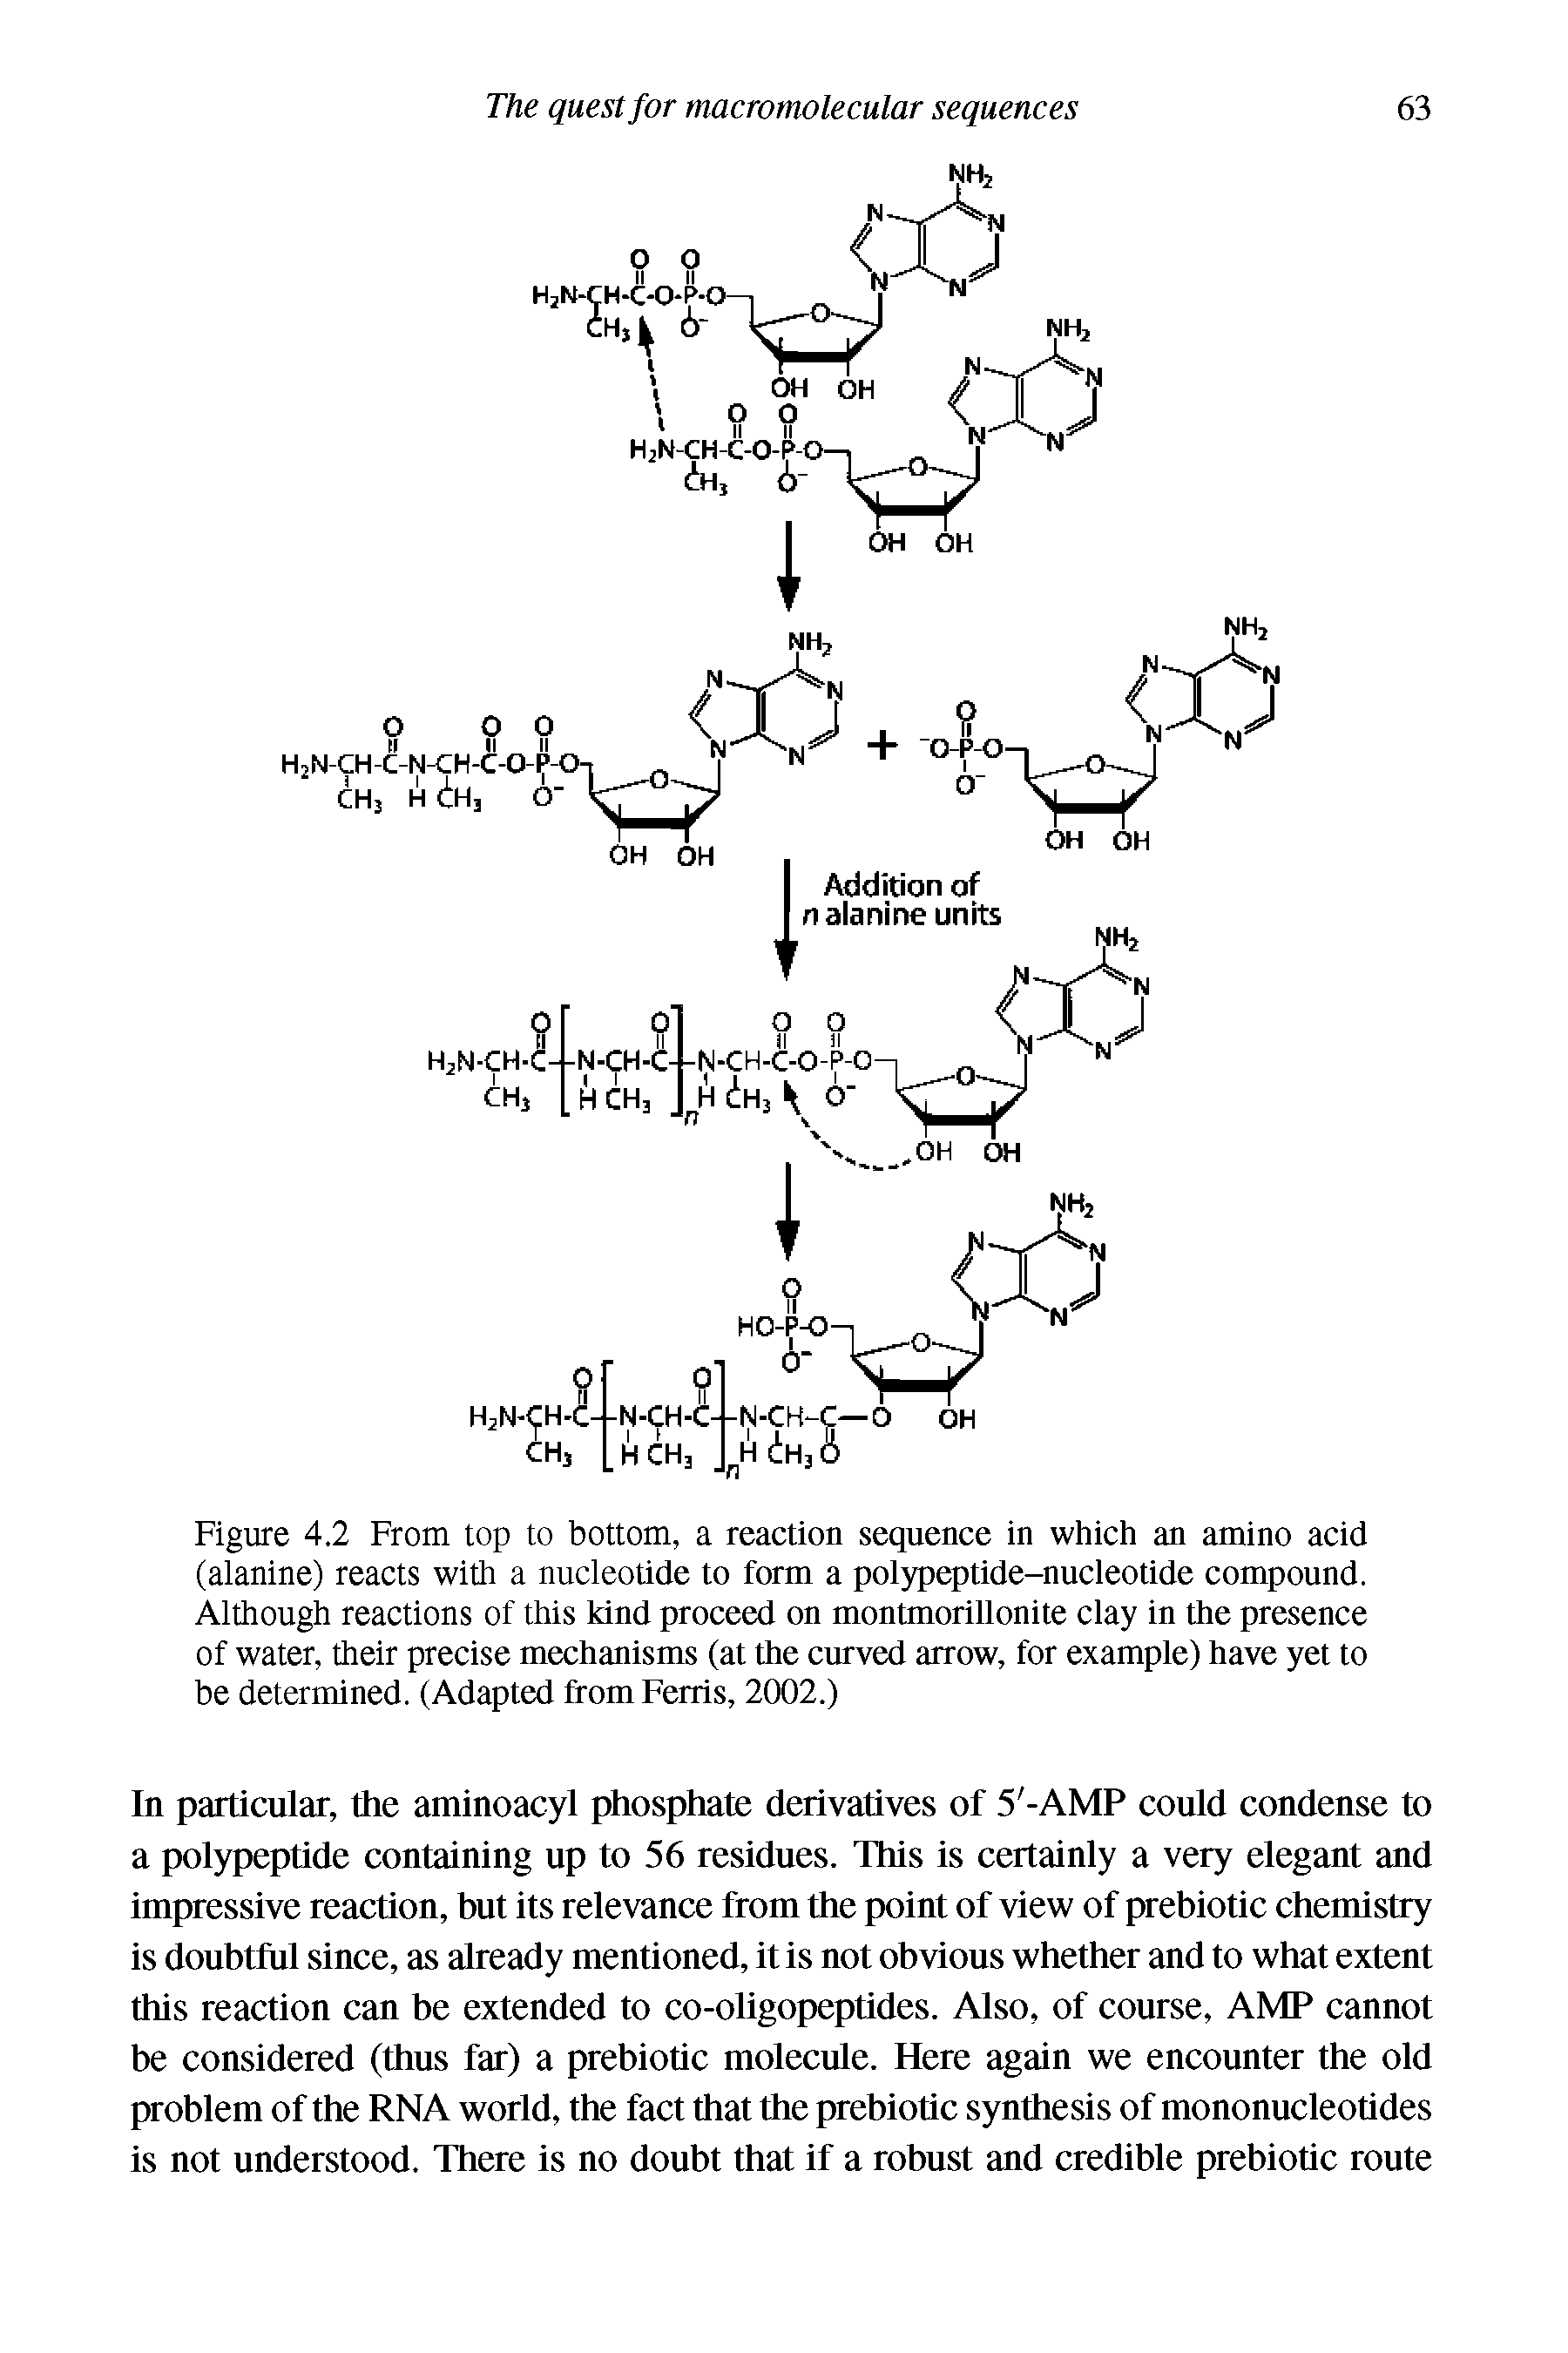 Figure 4.2 From top to bottom, a reaction sequence in which an amino acid (alanine) reacts with a nucleotide to form a polypeptide-nucleotide compound. Although reactions of this kind proceed on montmorillonite clay in the presence of water, their precise mechanisms (at the curved arrow, for example) have yet to be determined. (Adapted from Ferris, 2002.)...